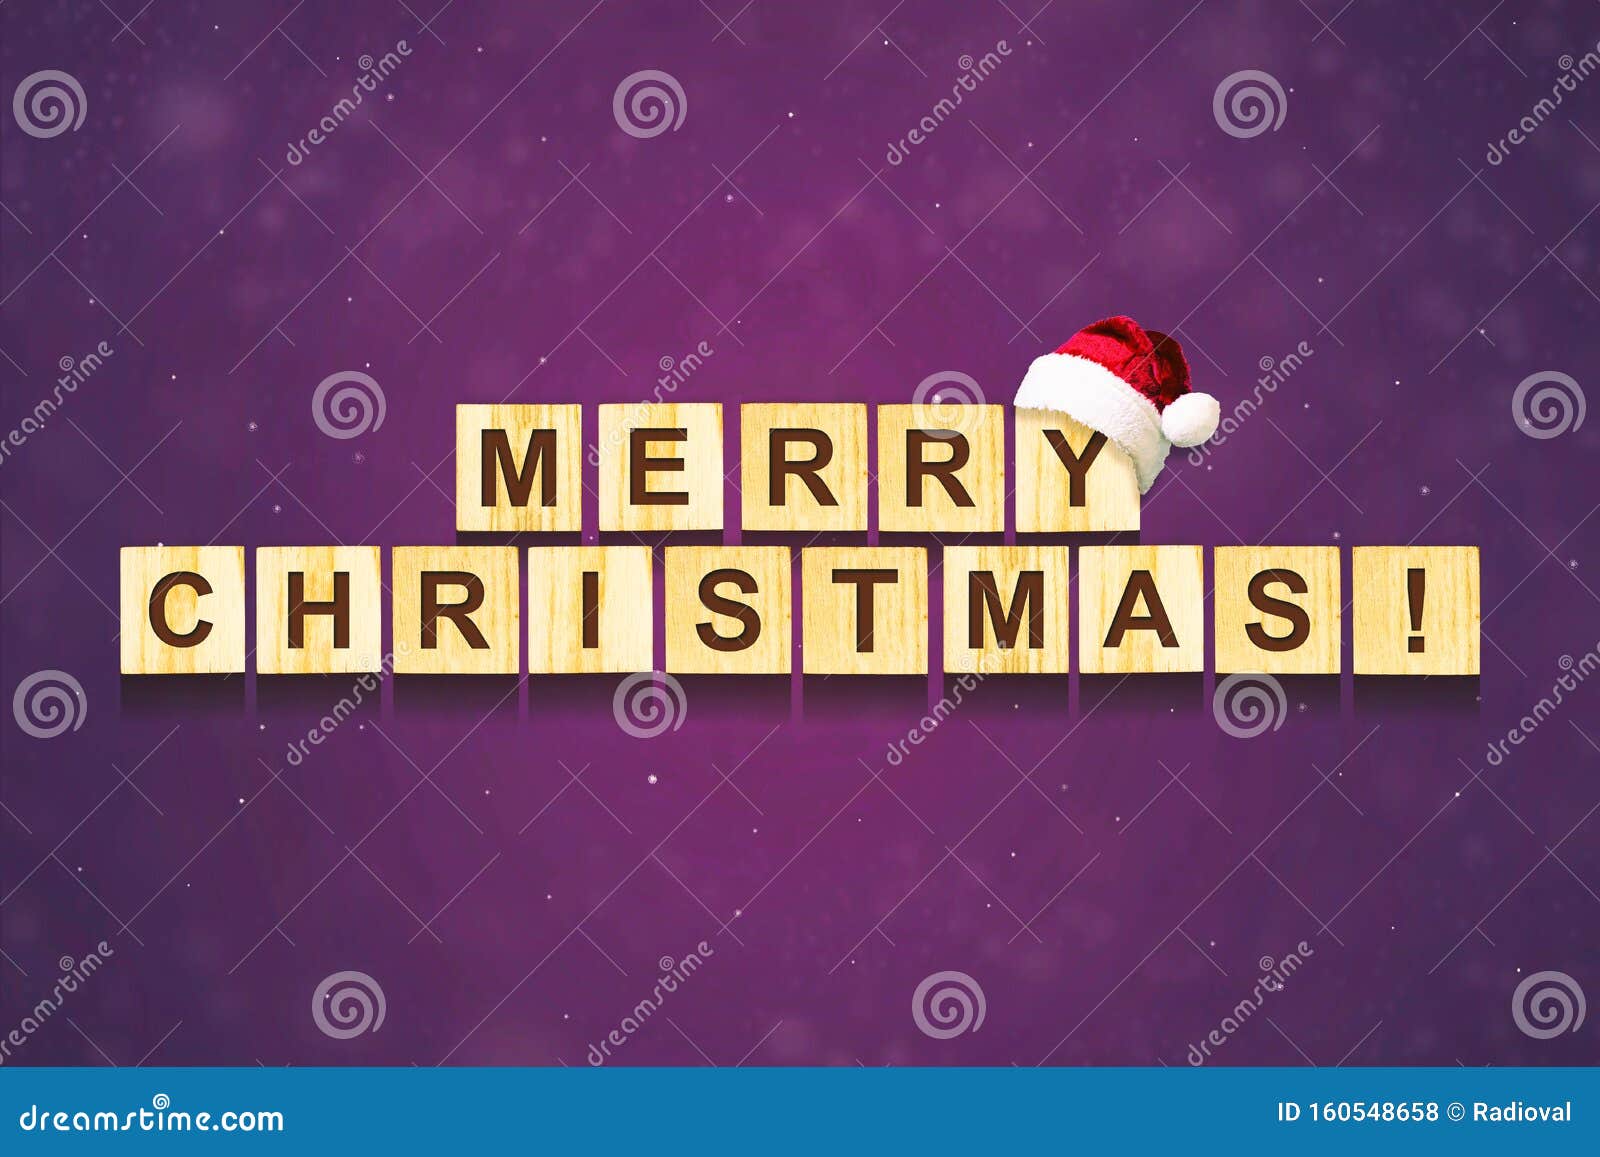 Merry Christmas Lettering On Wooden Blocks On A Dark Background Christmas Card F Stock Photo Image Of Bright Greeting 160548658